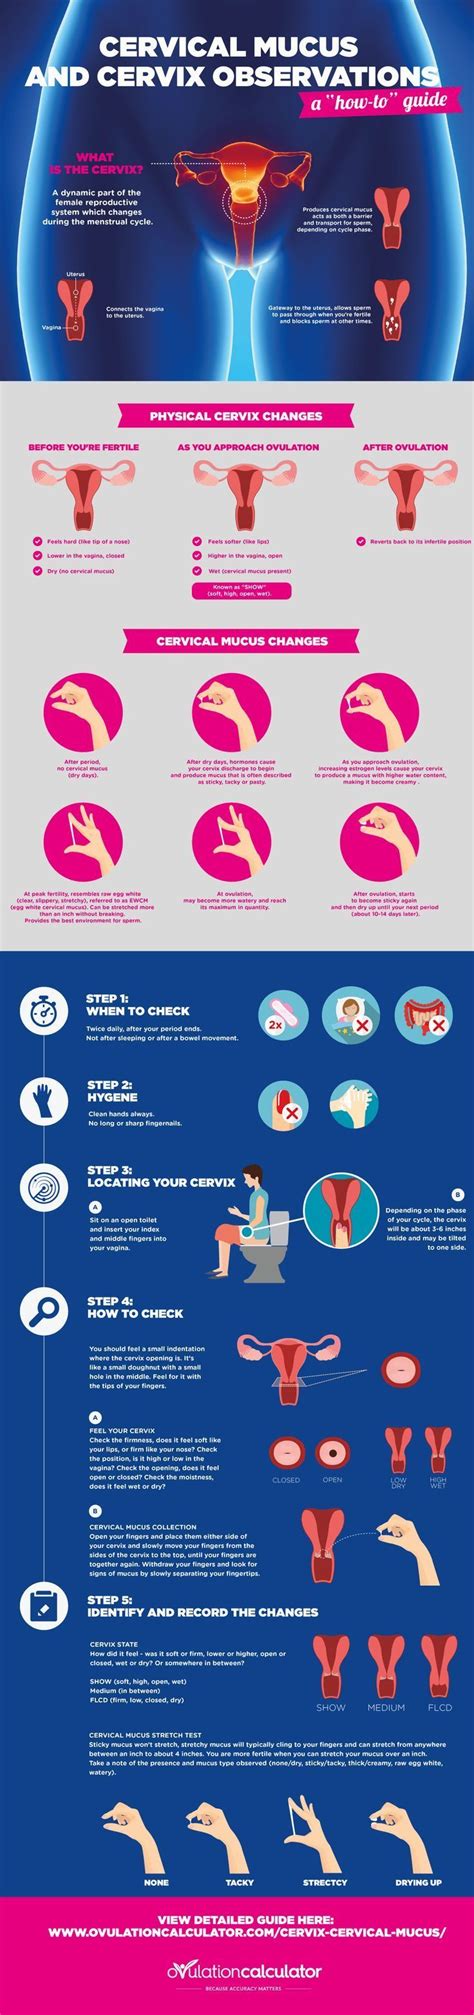 Cervix And Cervical Mucus Observations Step By Step Infographic Learn How To Check Your Cervix